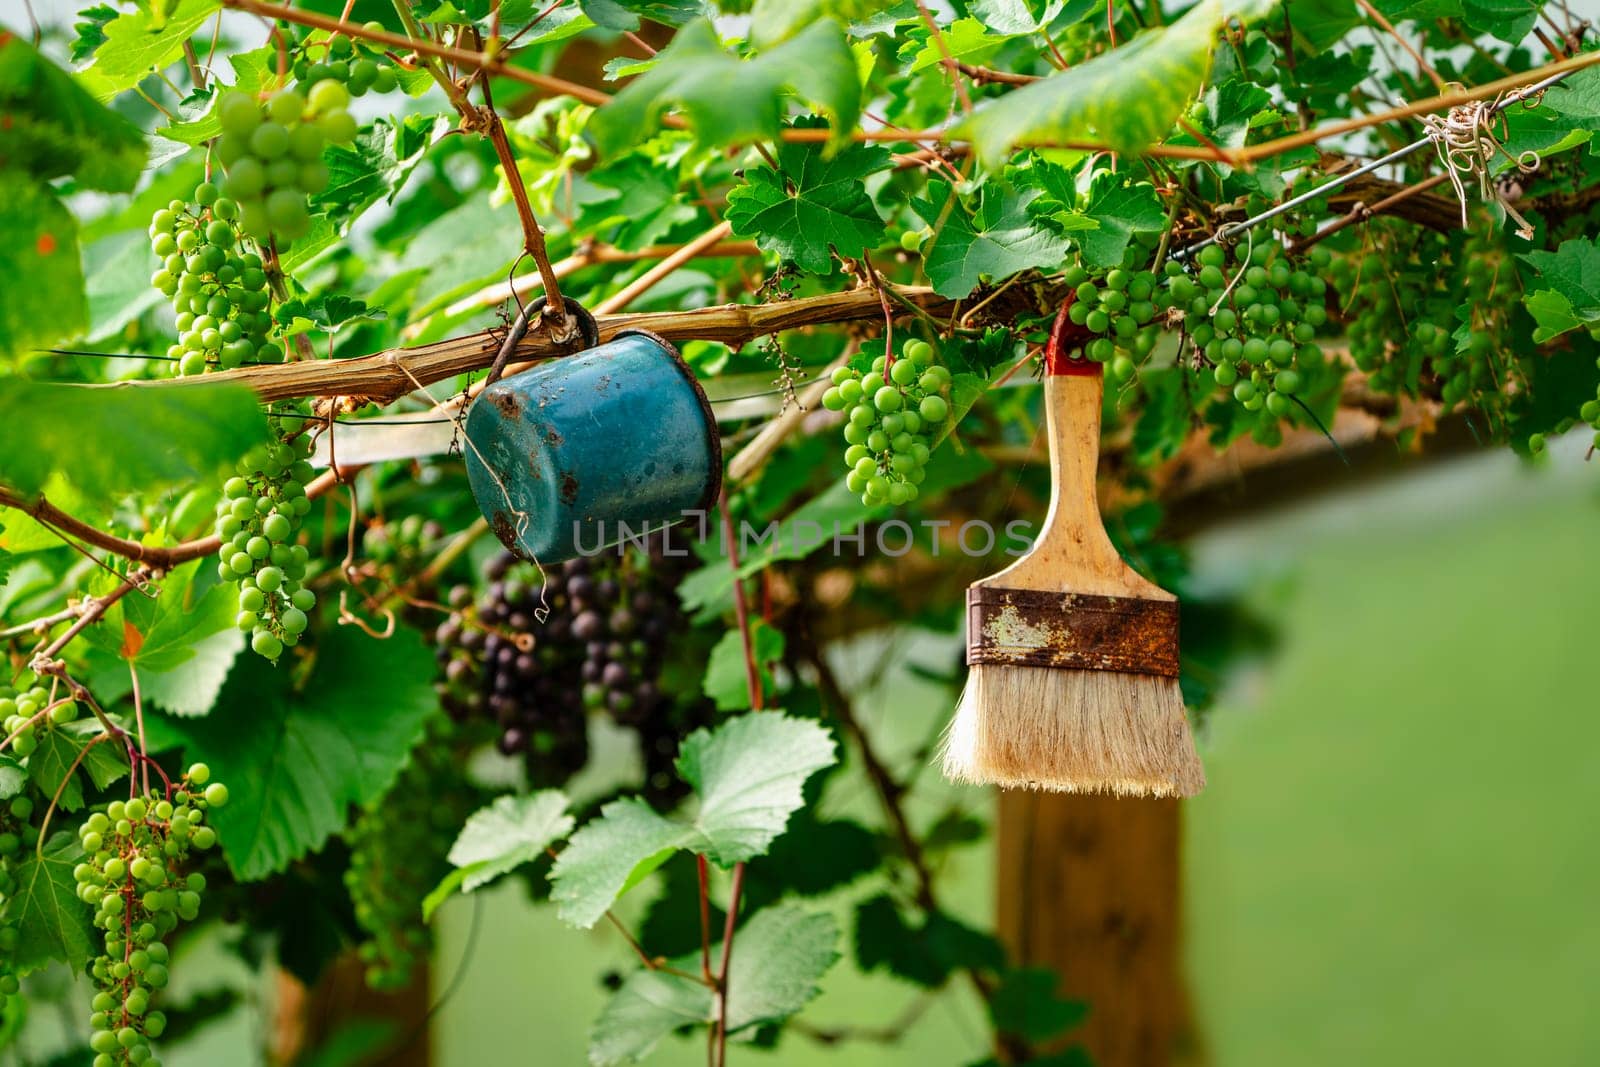 A beautiful and serene view of a well-maintained vineyard inside a spacious greenhouse, creating a charming scene against the backdrop of the idyllic northern regions